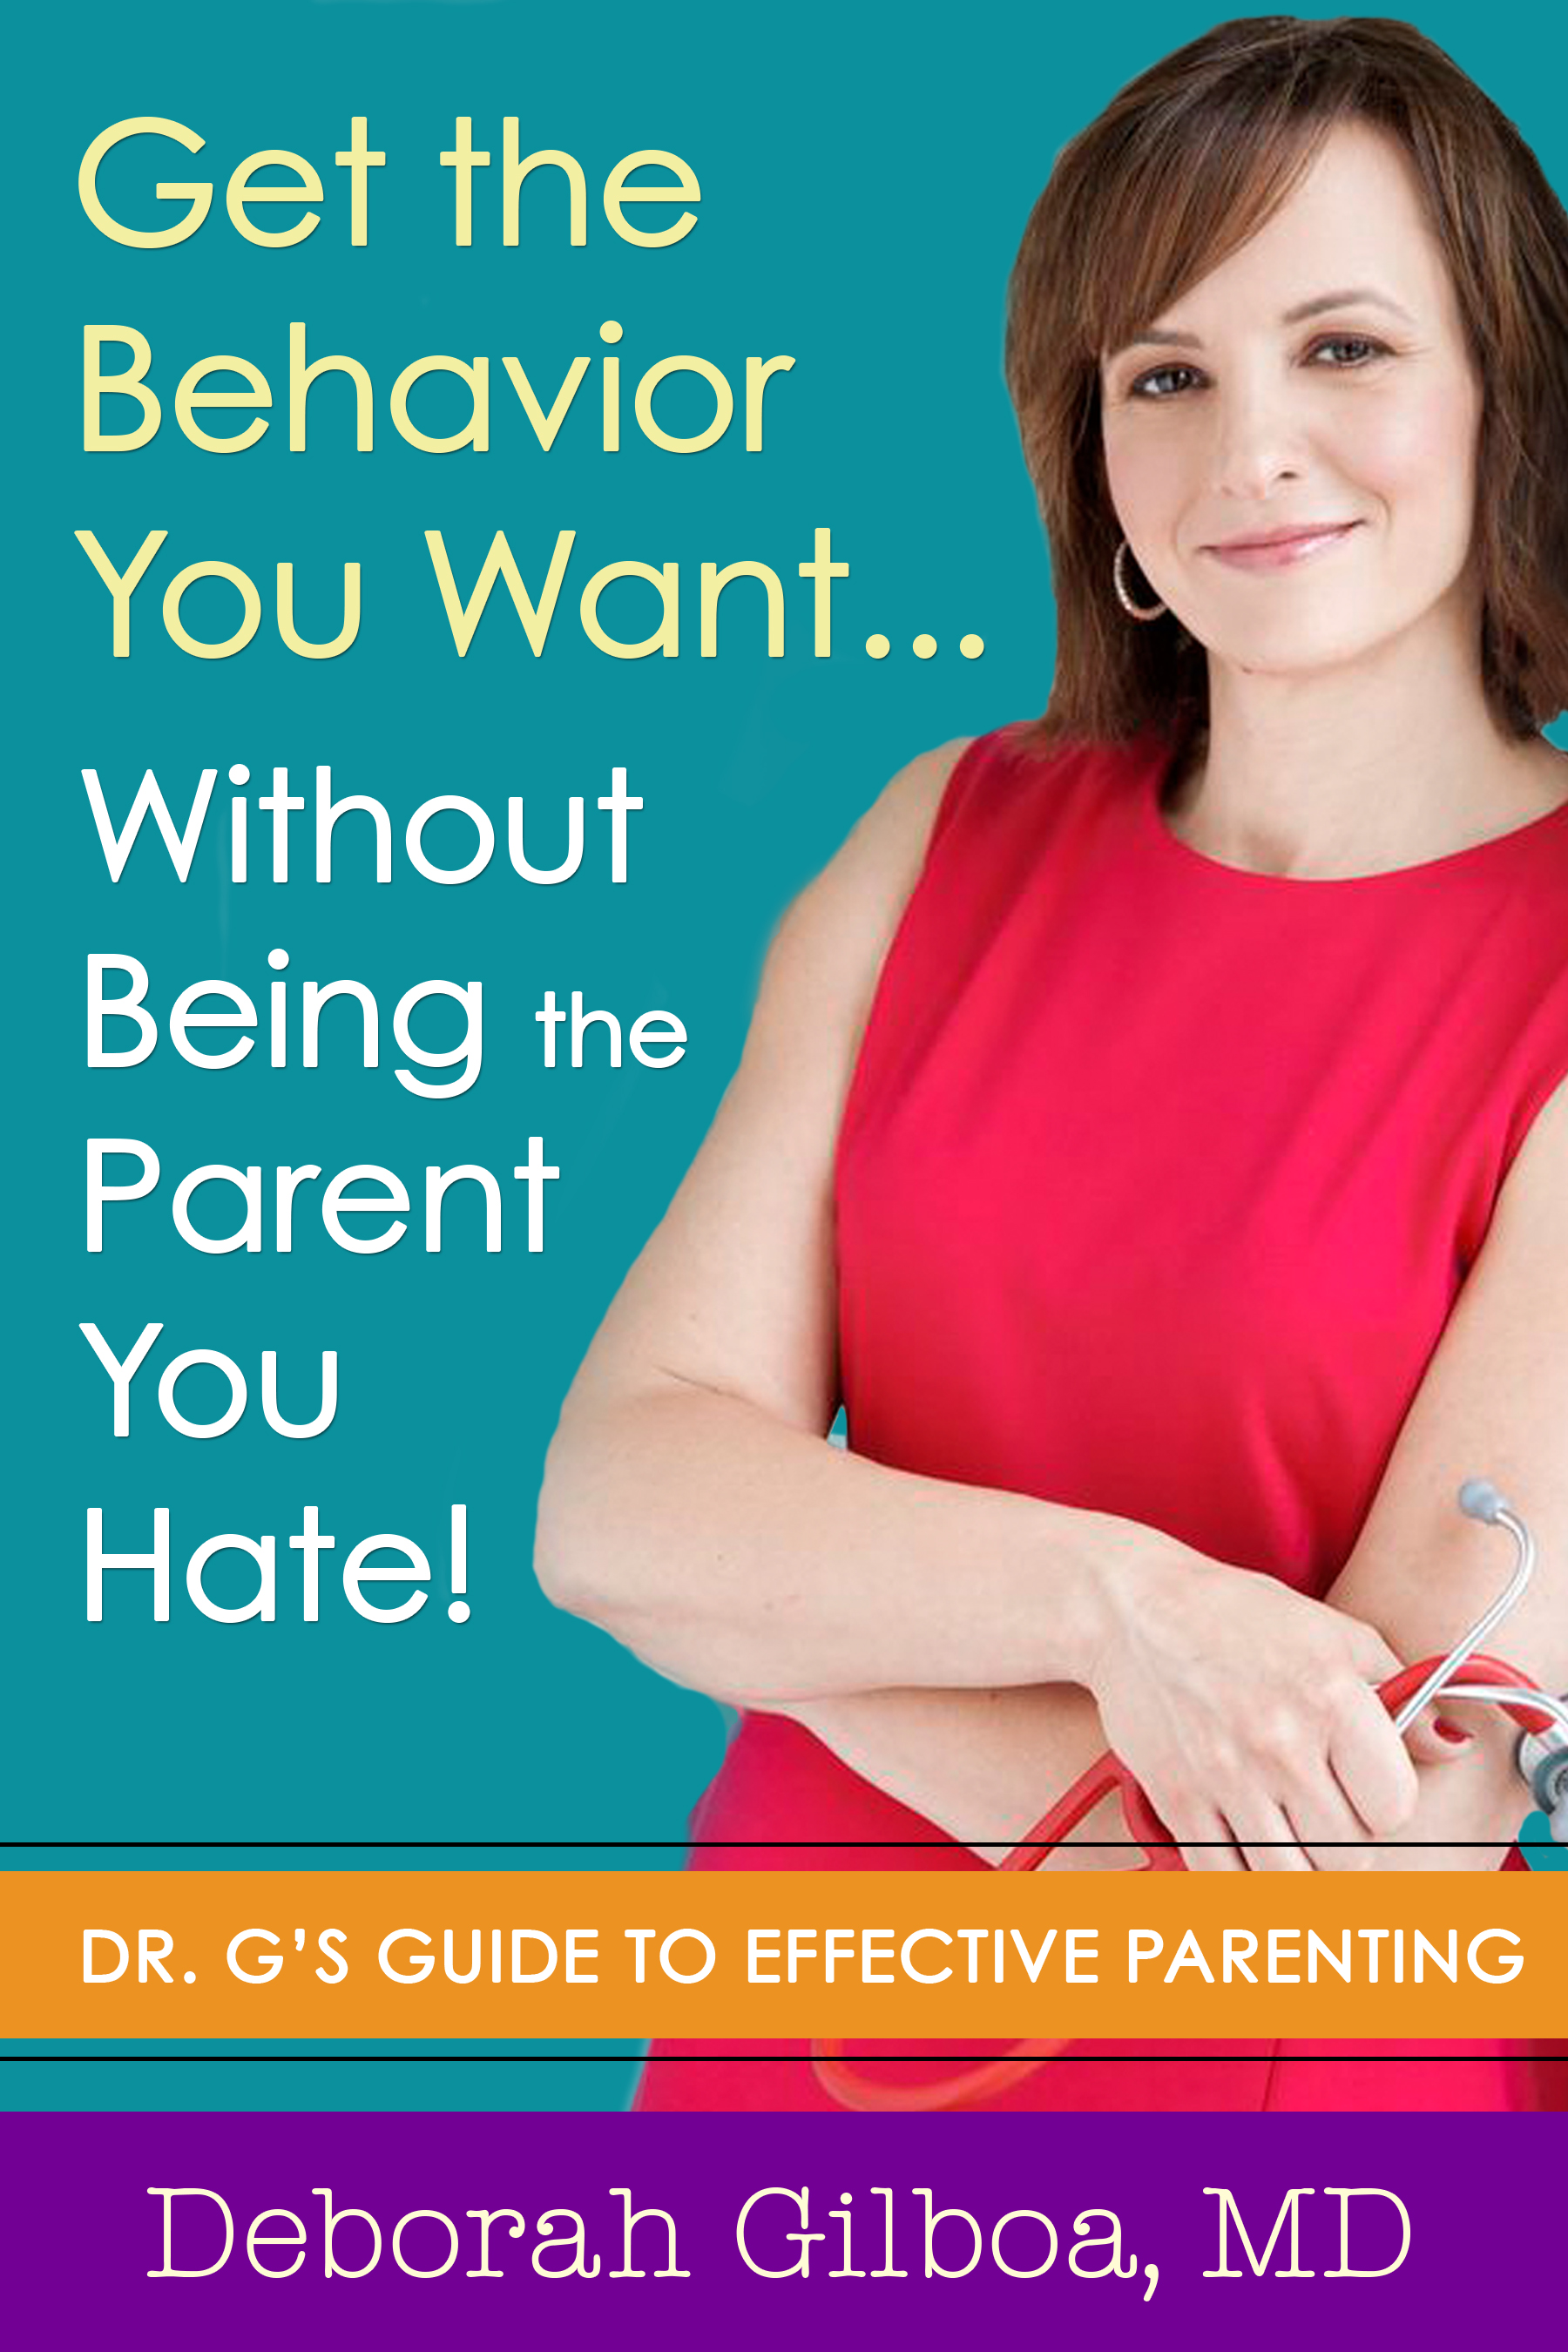 Get the Behavior You Want by Dr. G